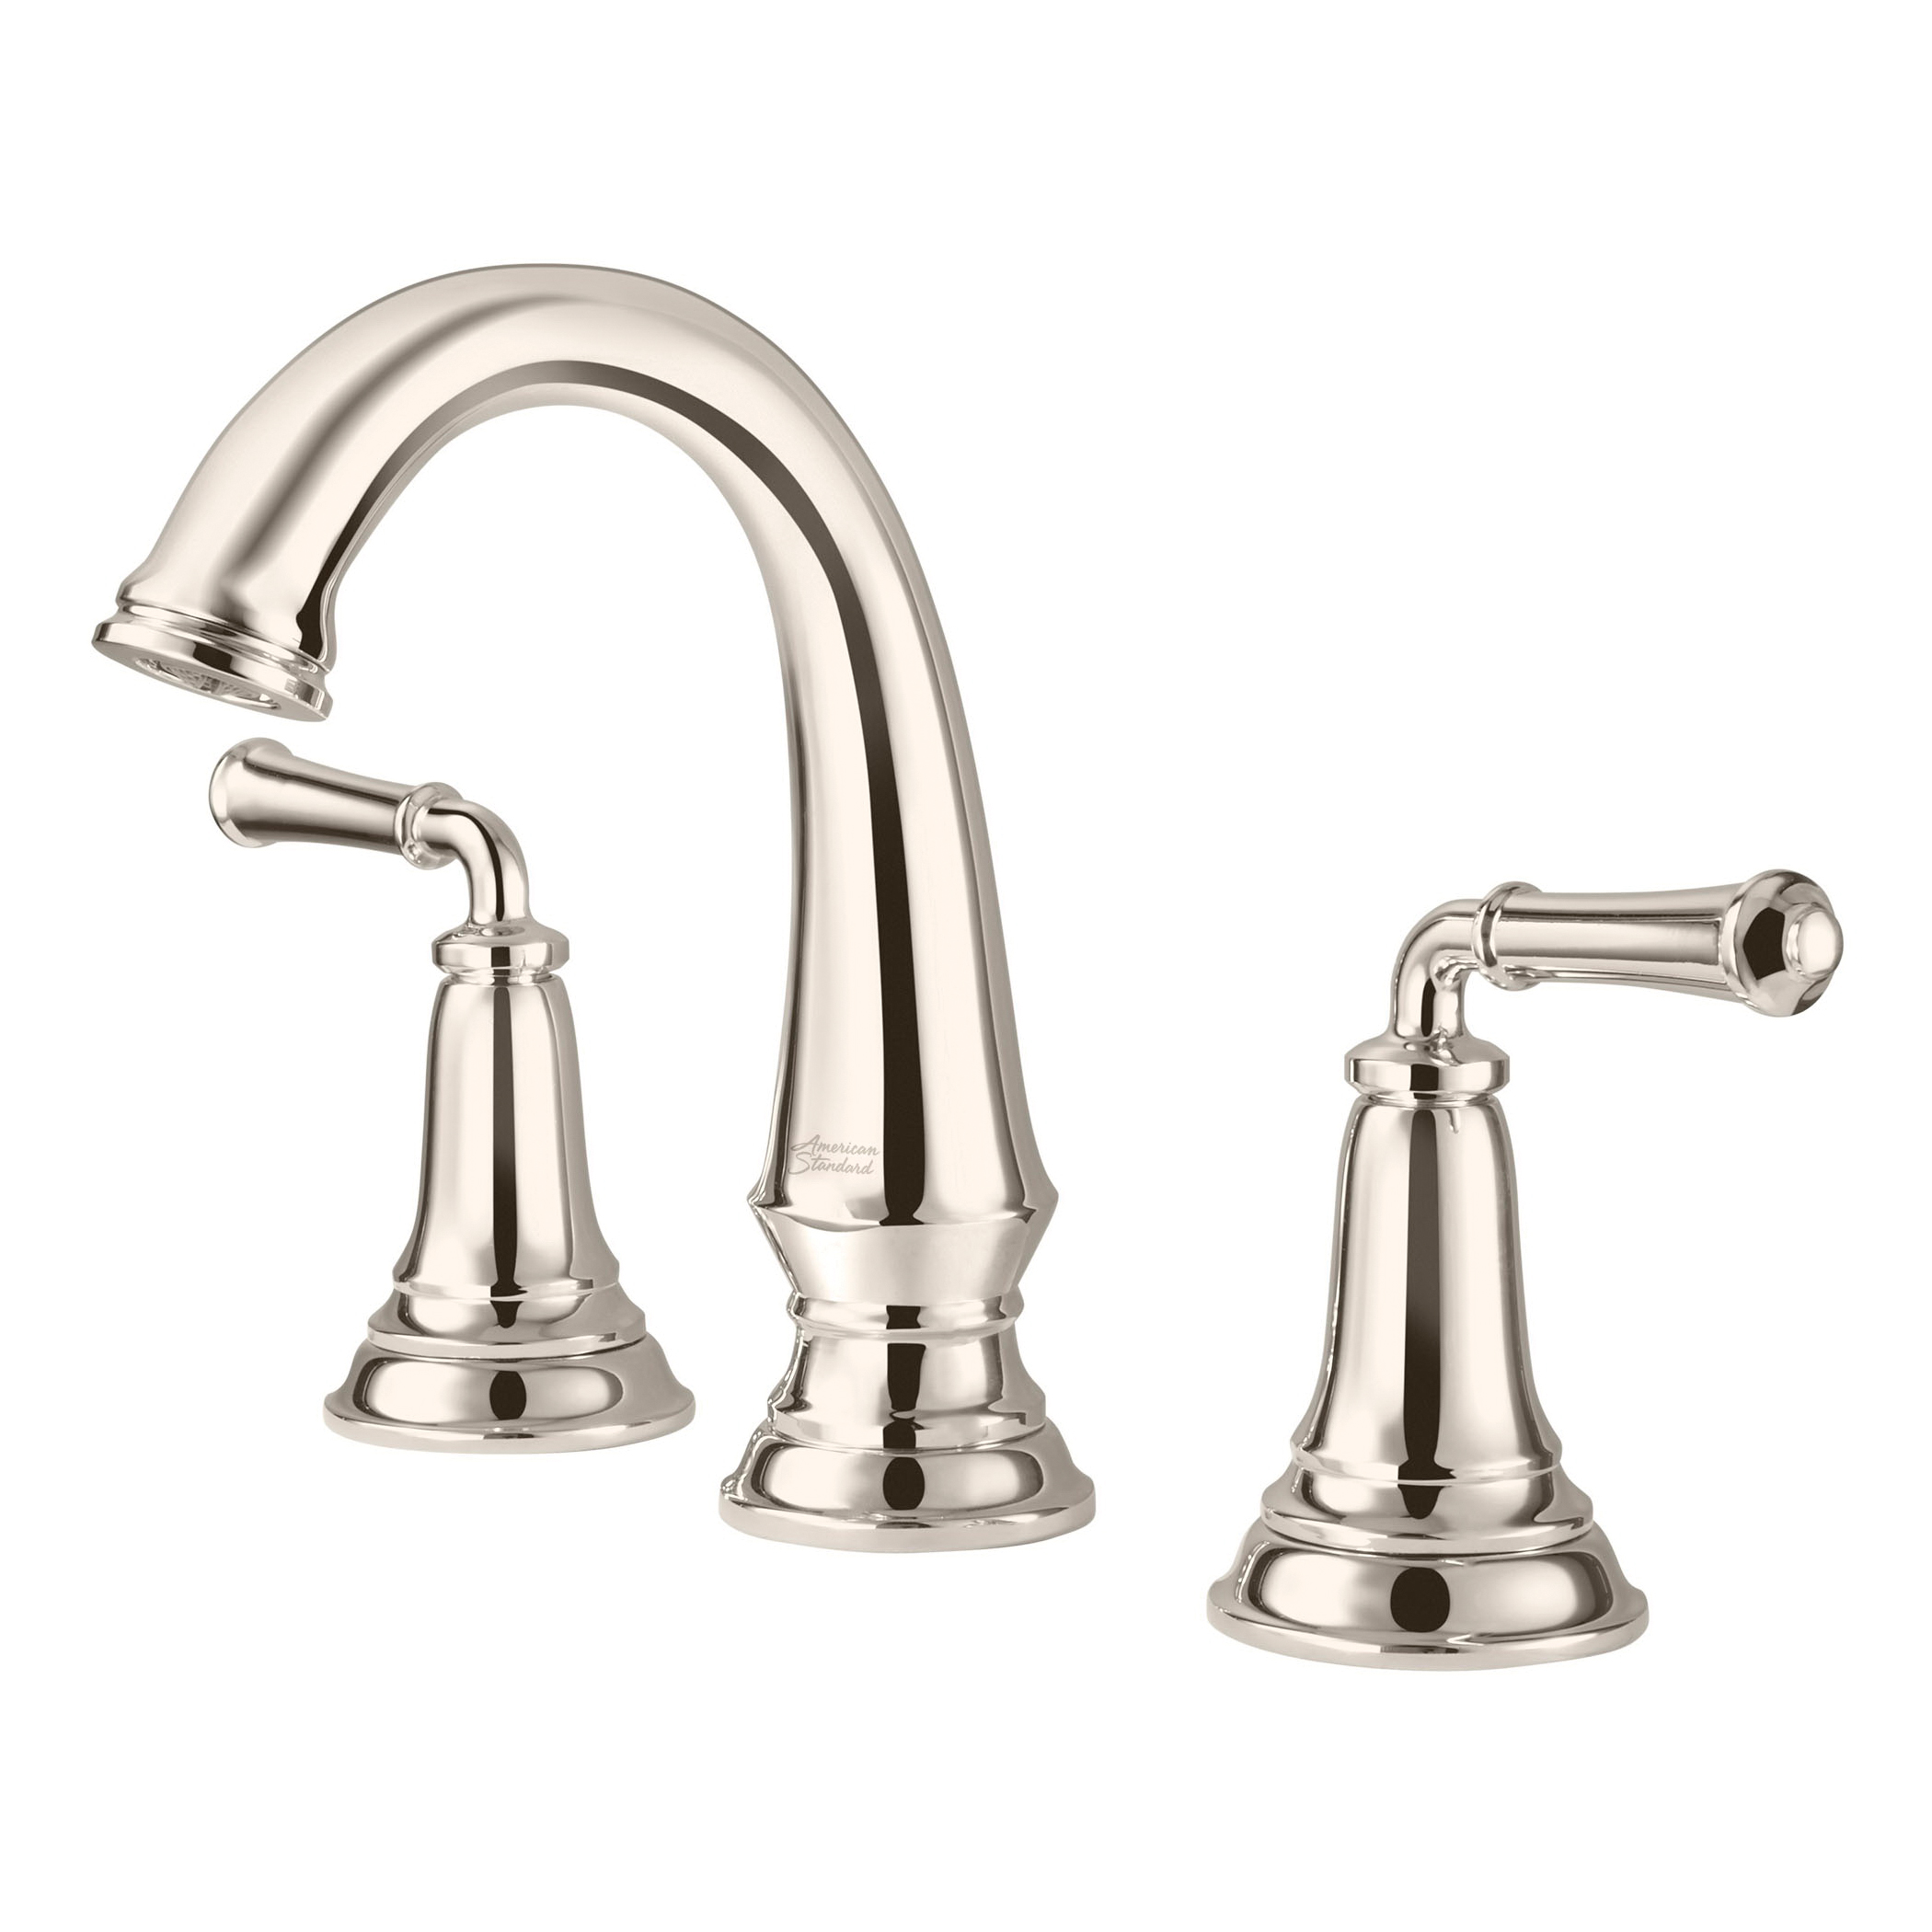 American Standard 7052807.013 Delancey® Widespread Lavatory Faucet, Residential, 1.2 gpm Flow Rate, 5-1/4 in H Spout, 8 in Center, PVD Polished Nickel, 2 Handles, Brass Push Pop-Up Drain, Import